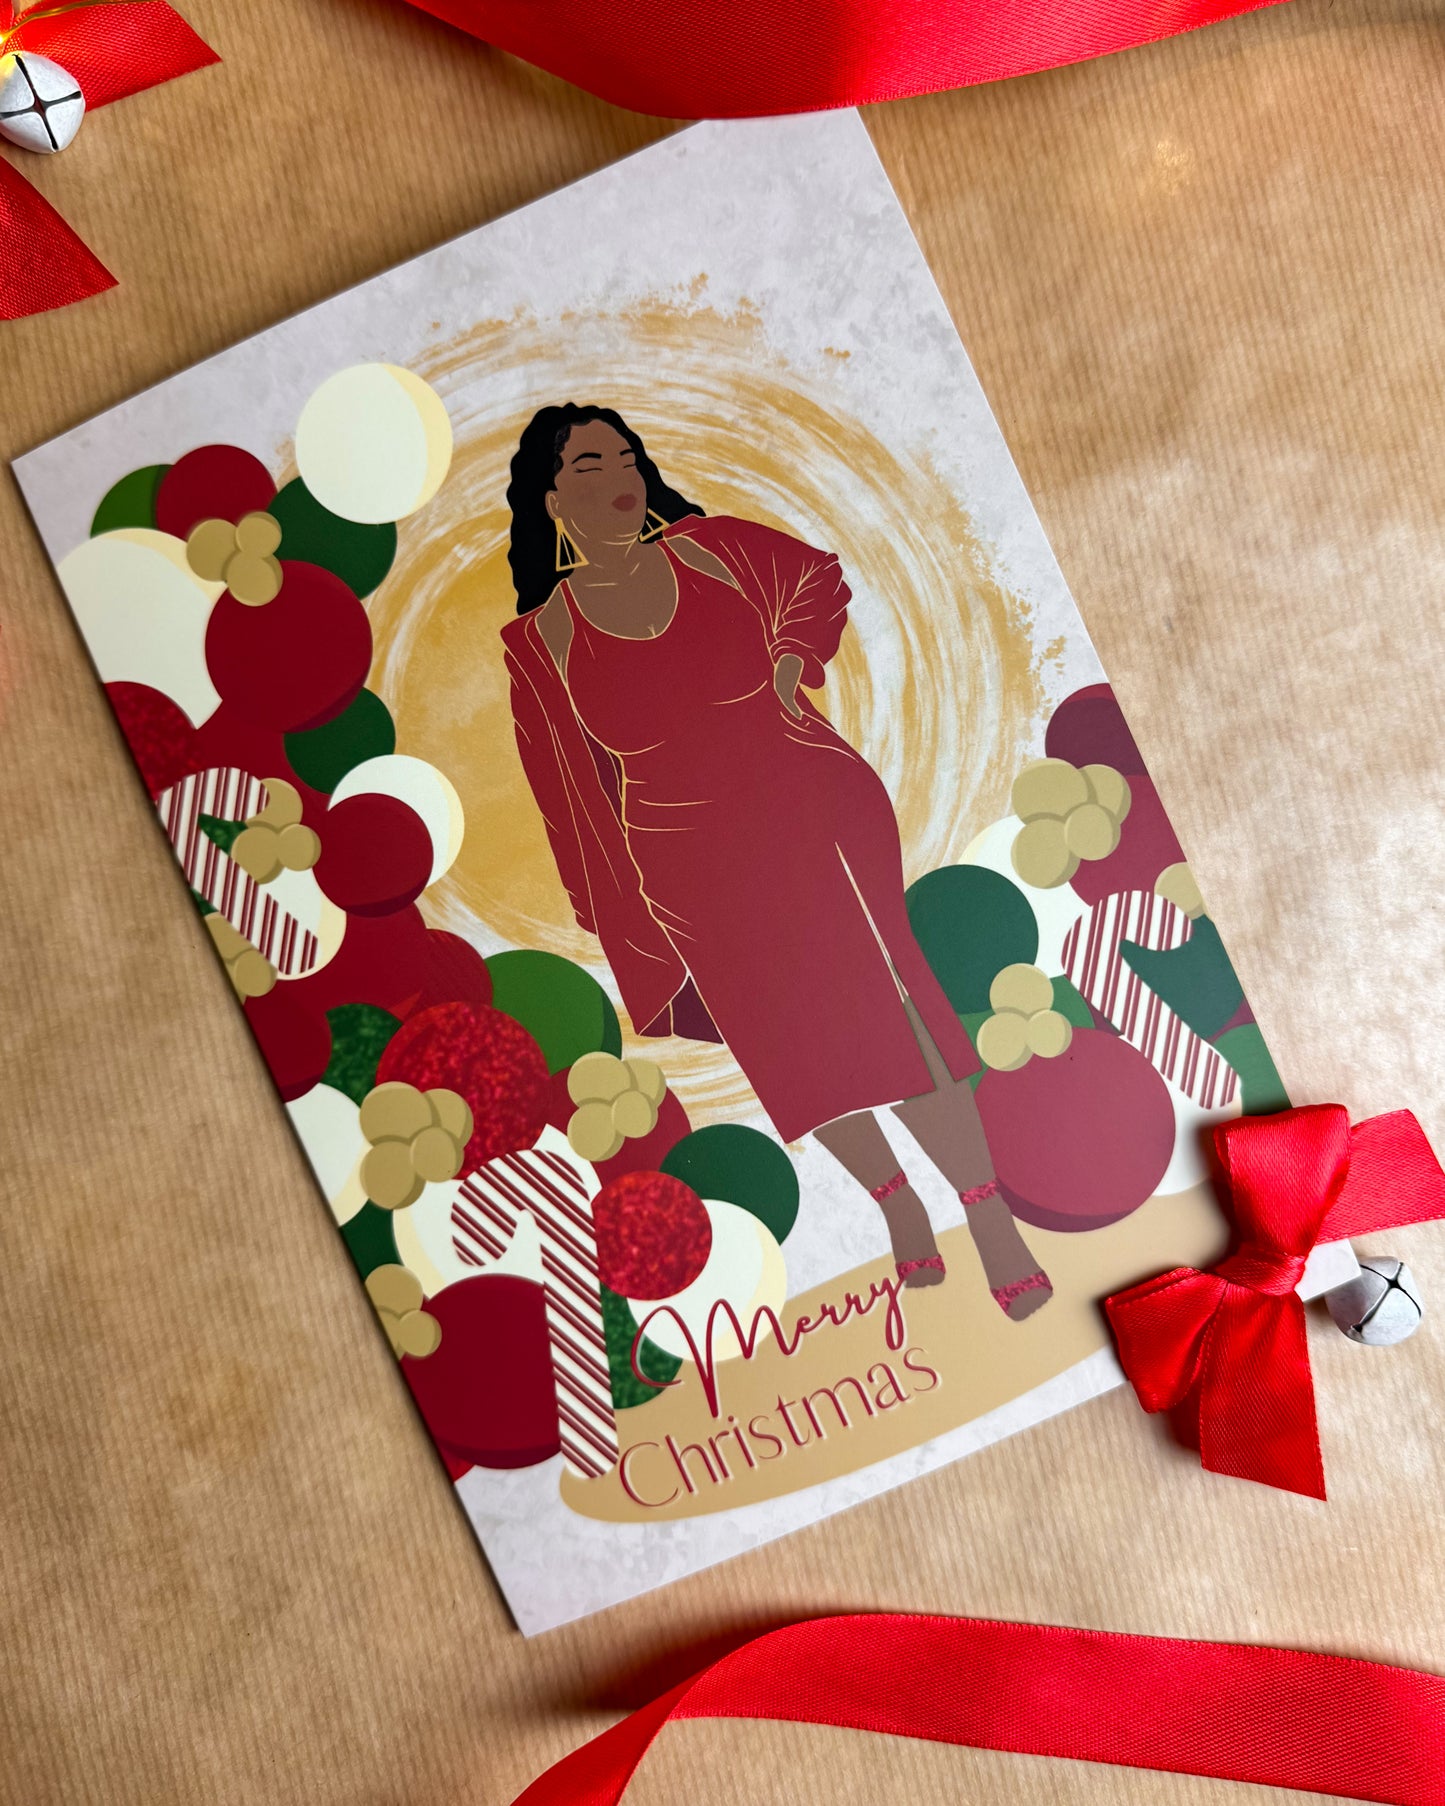 Dionne’s Christmas Party Balloons - Black Woman Christmas Card